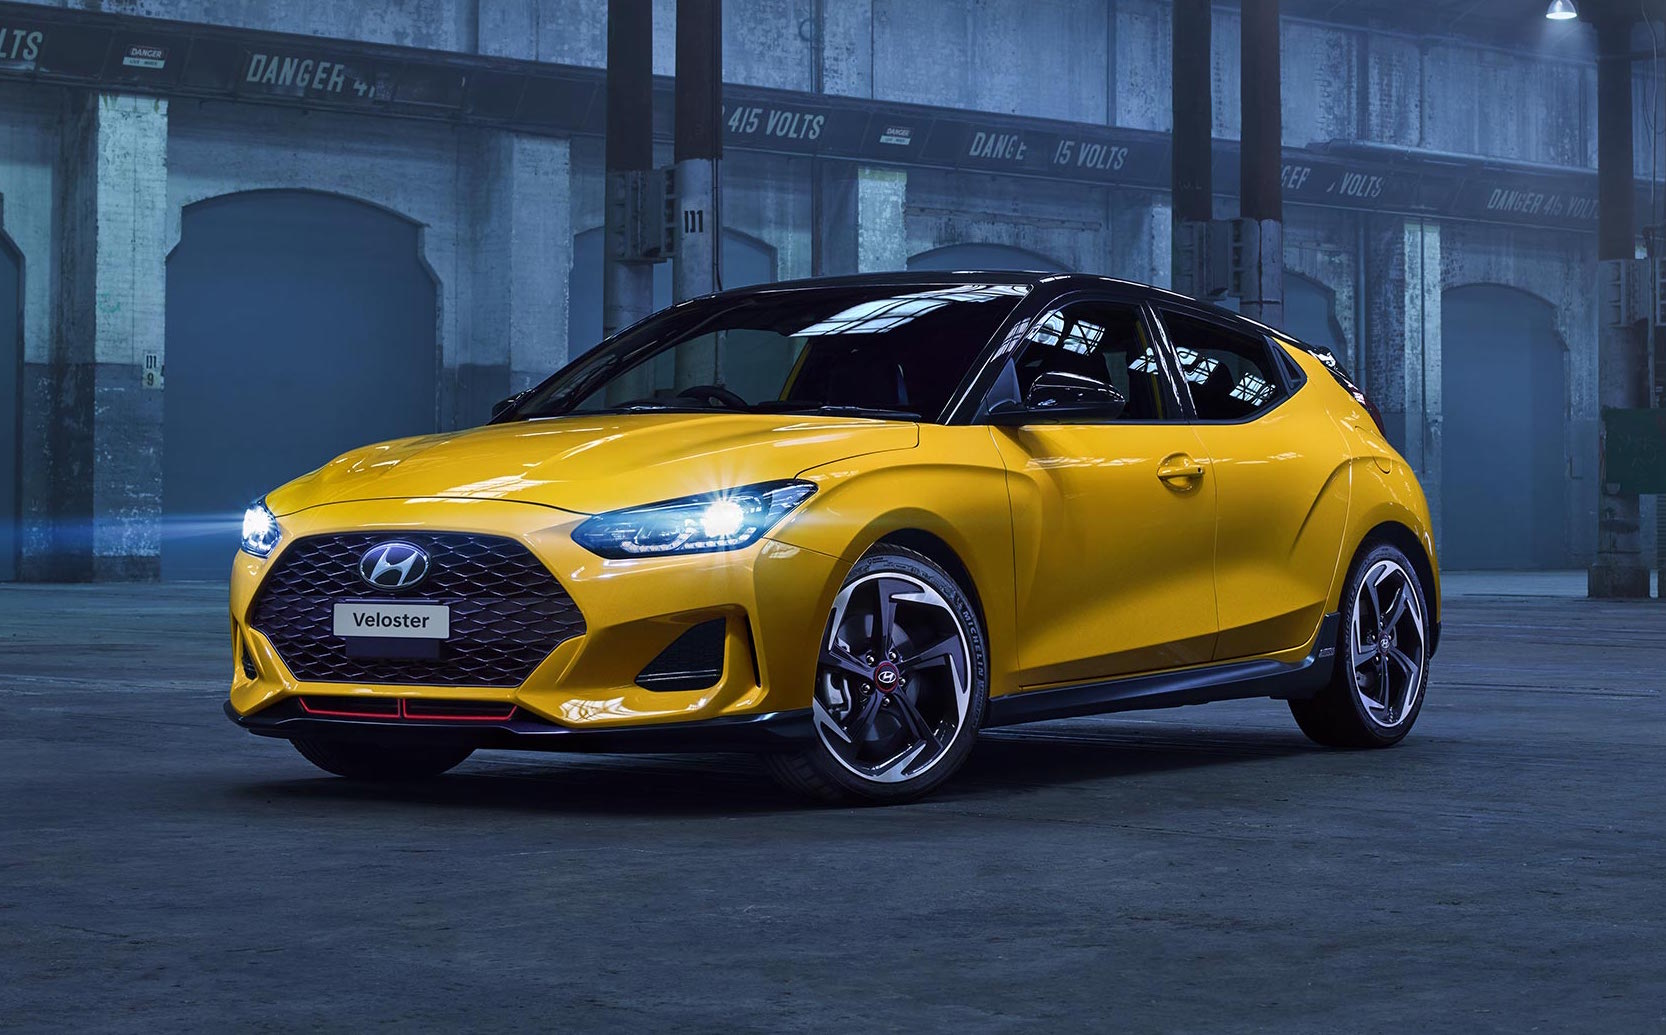 2020 Hyundai Veloster on sale in Australia from $29,490